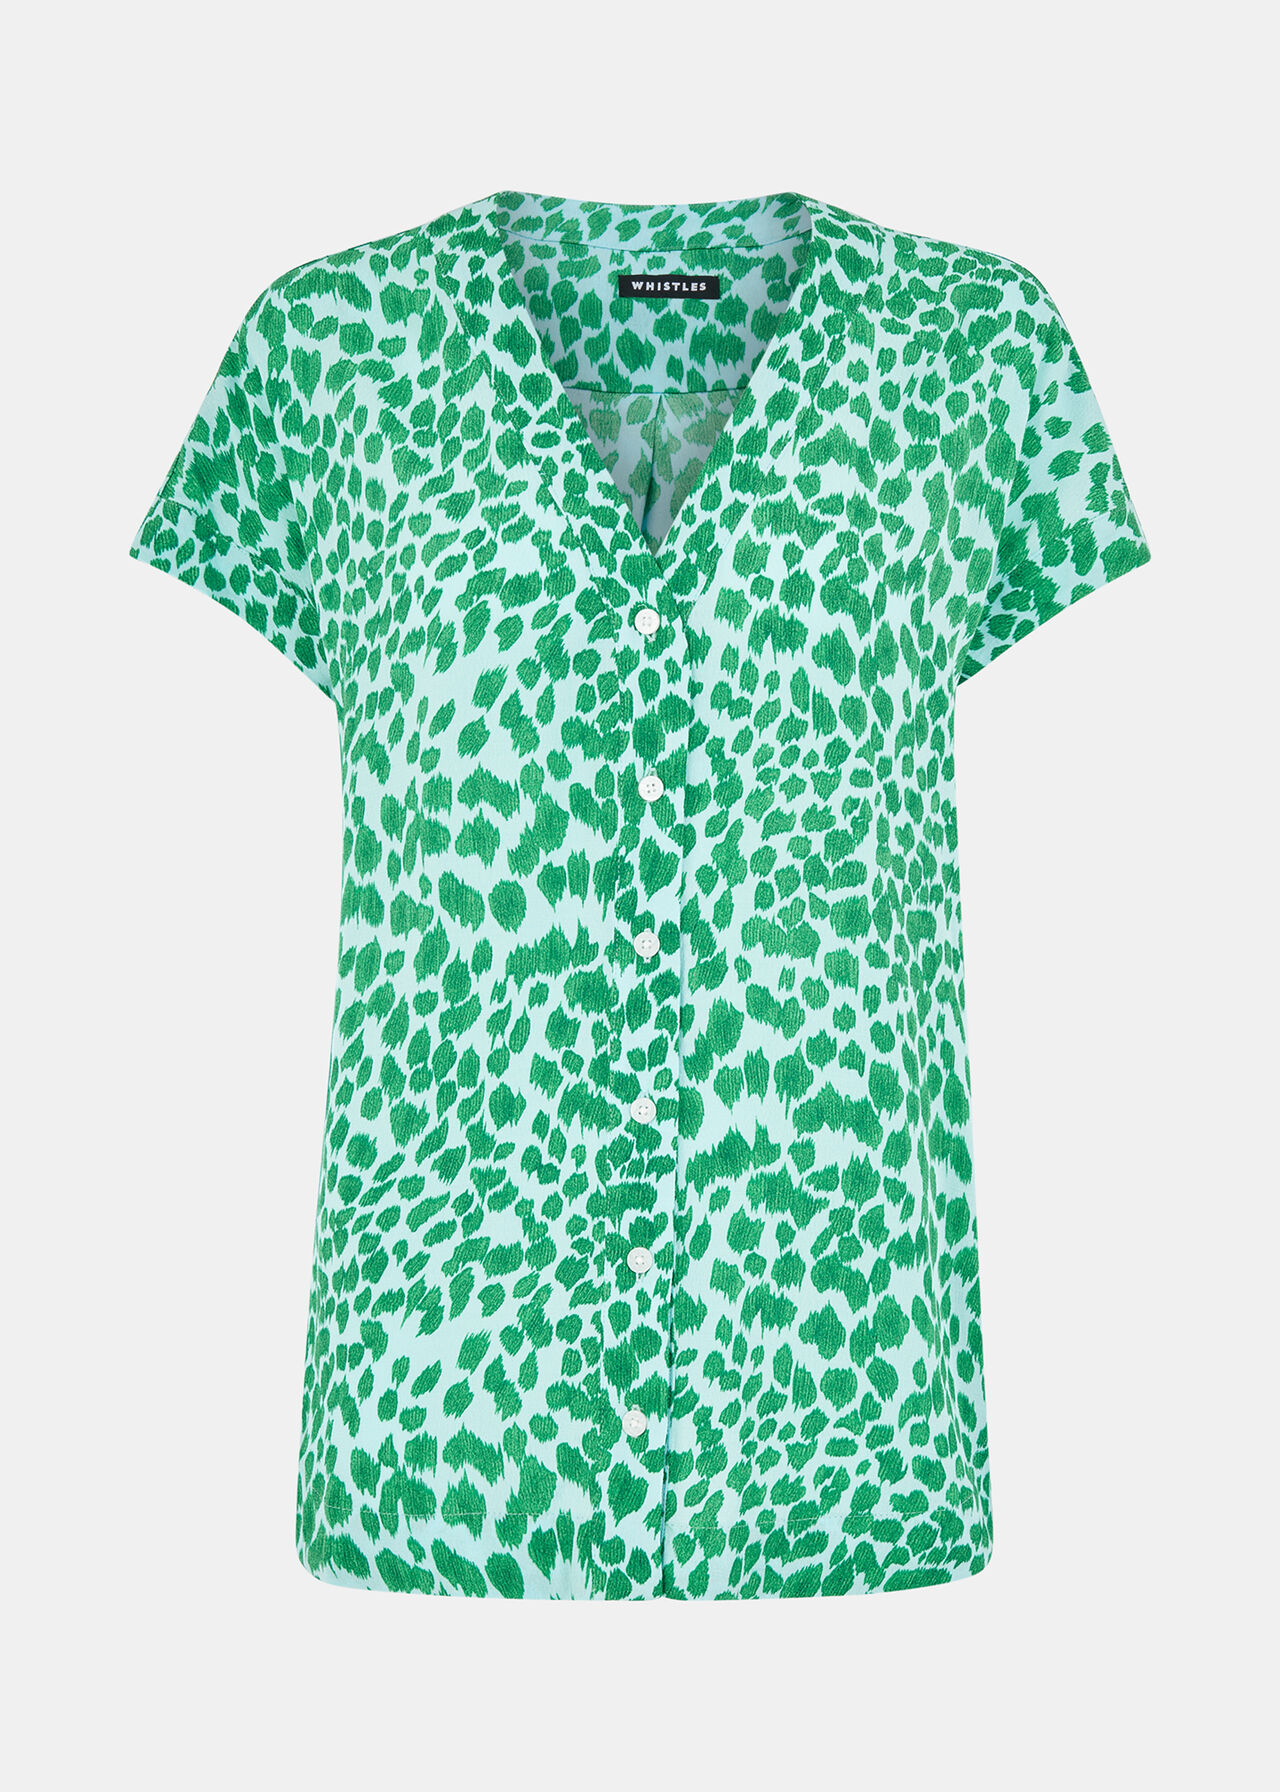 Green/Multi Smooth Leopard Print Blouse | WHISTLES